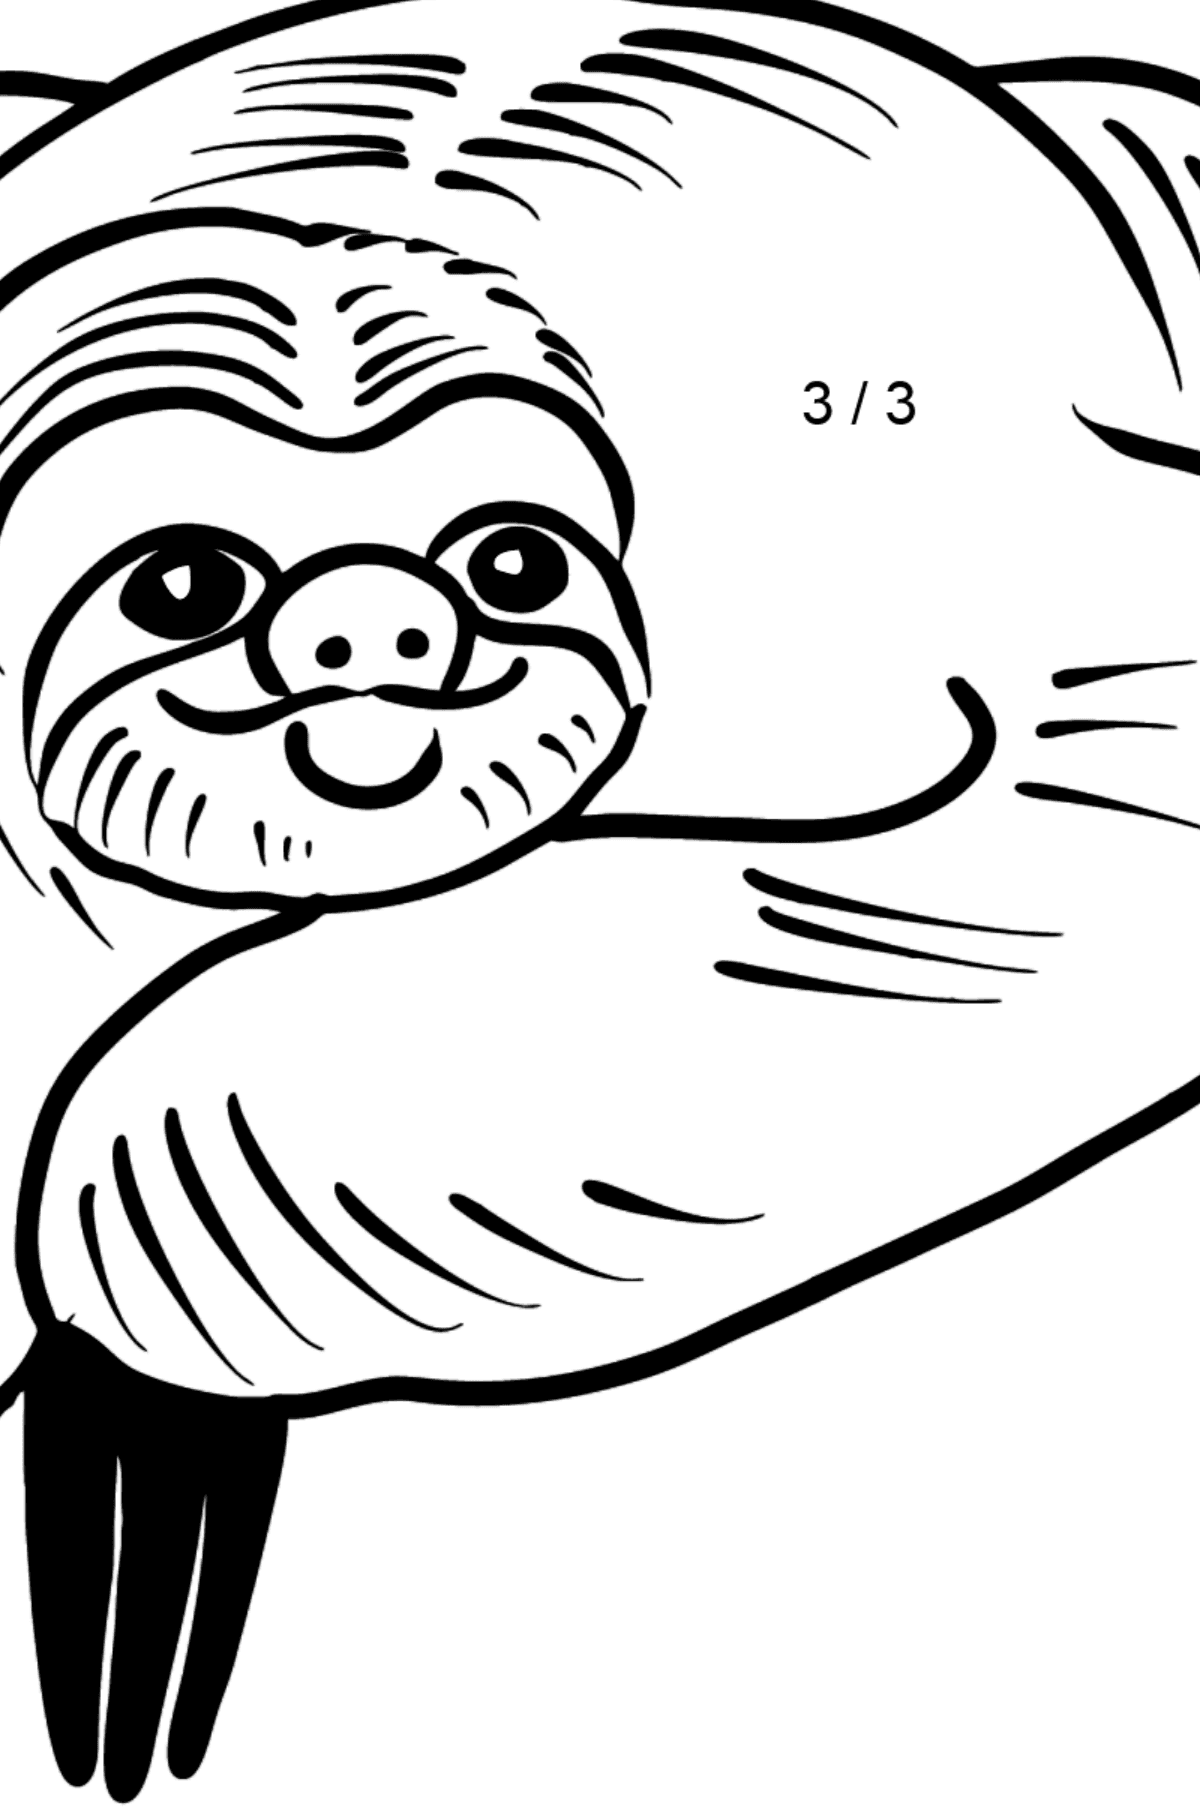 Sloth coloring page - Math Coloring - Division for Kids